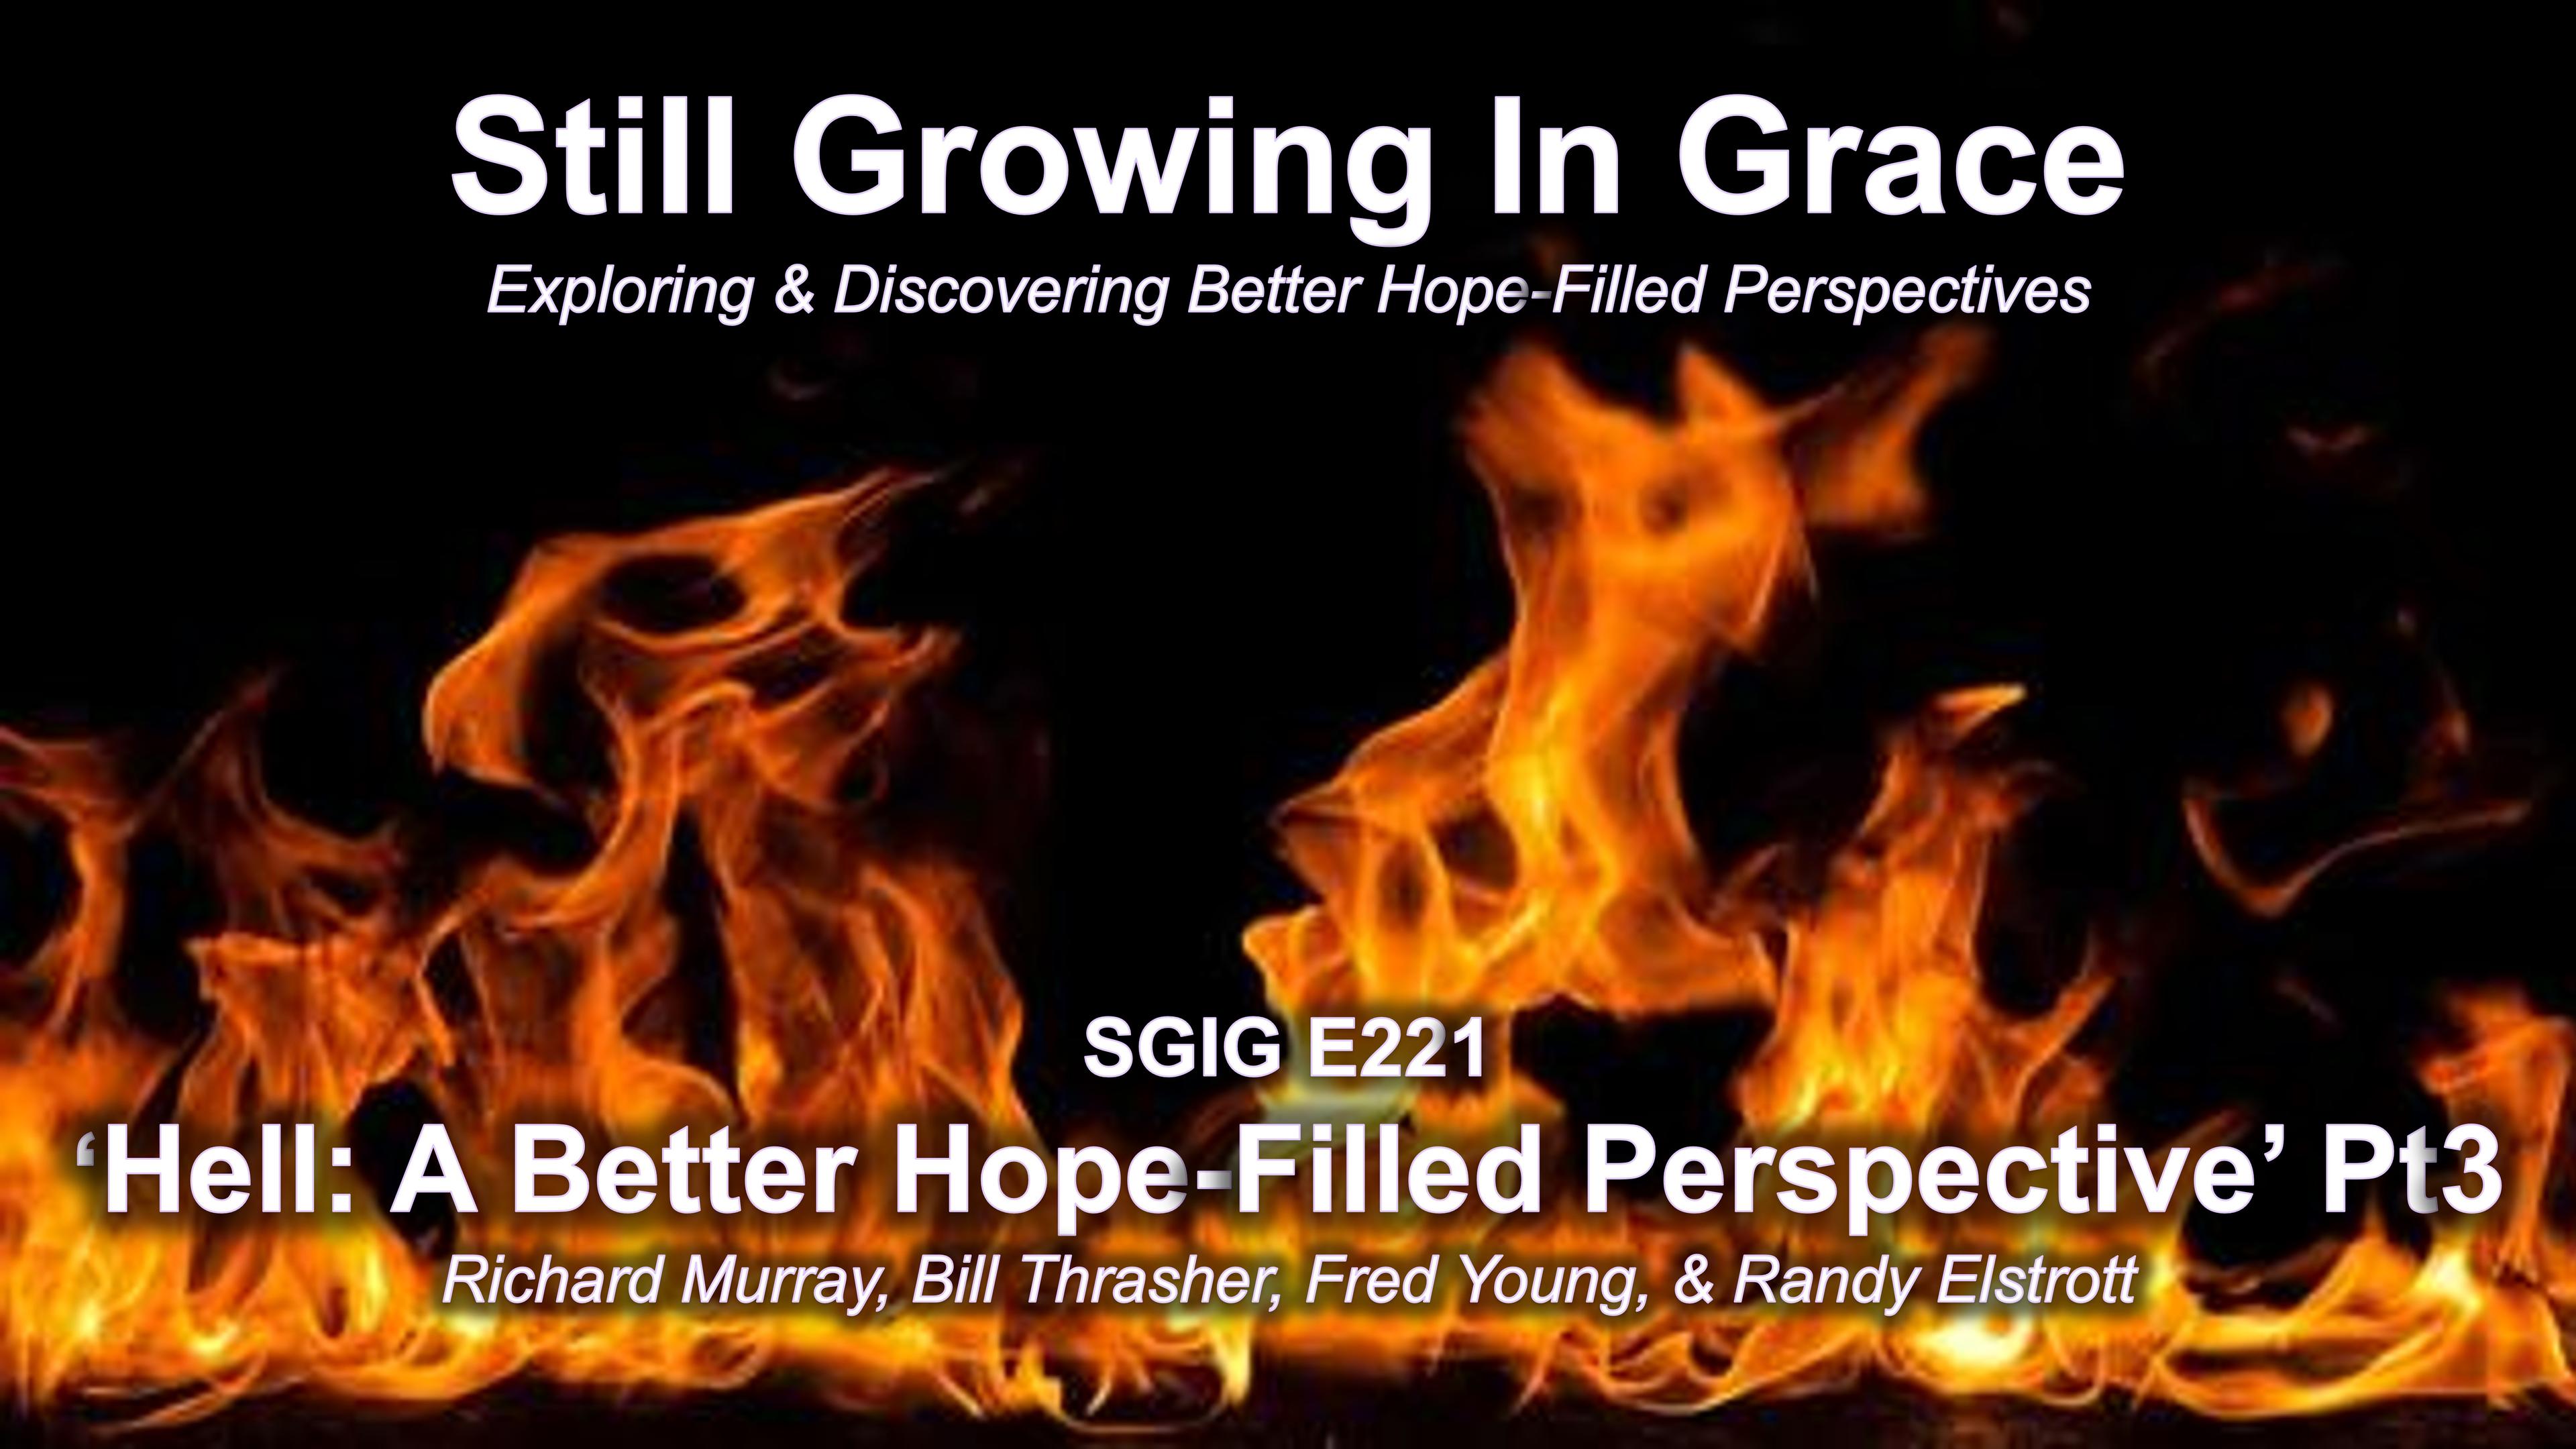 SGIG E221 Does Hell Exist?  What Is Its Purpose, Punishment Or Restorative Pt 3